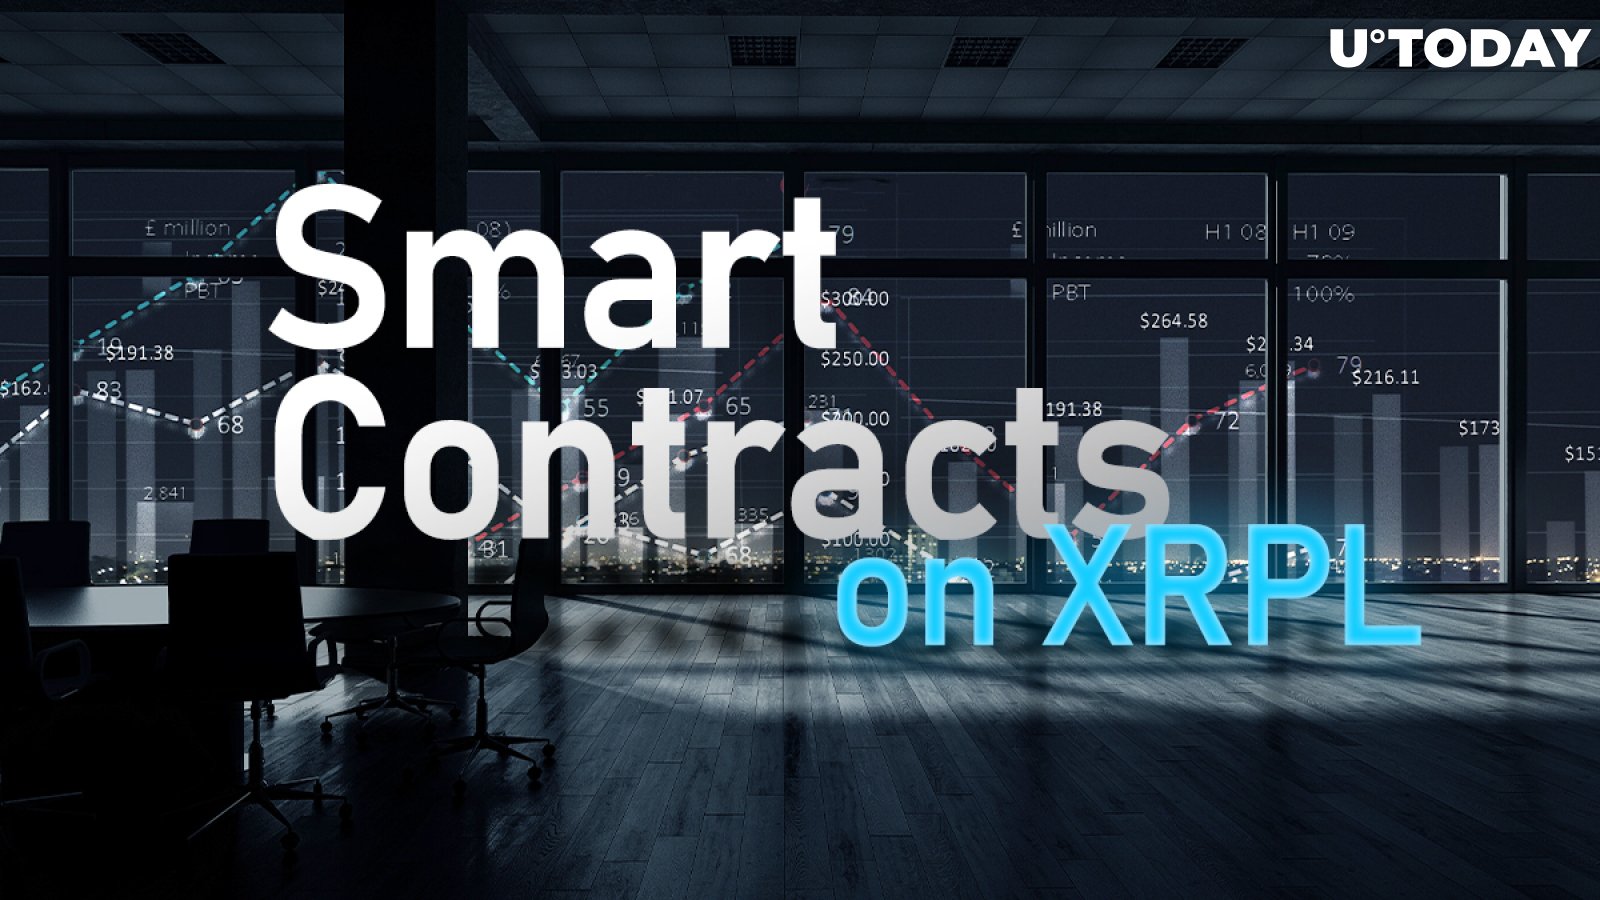 XPR Ledger to Add Smart Contracts as Ripple’s Xpring Invests in Flare Networks